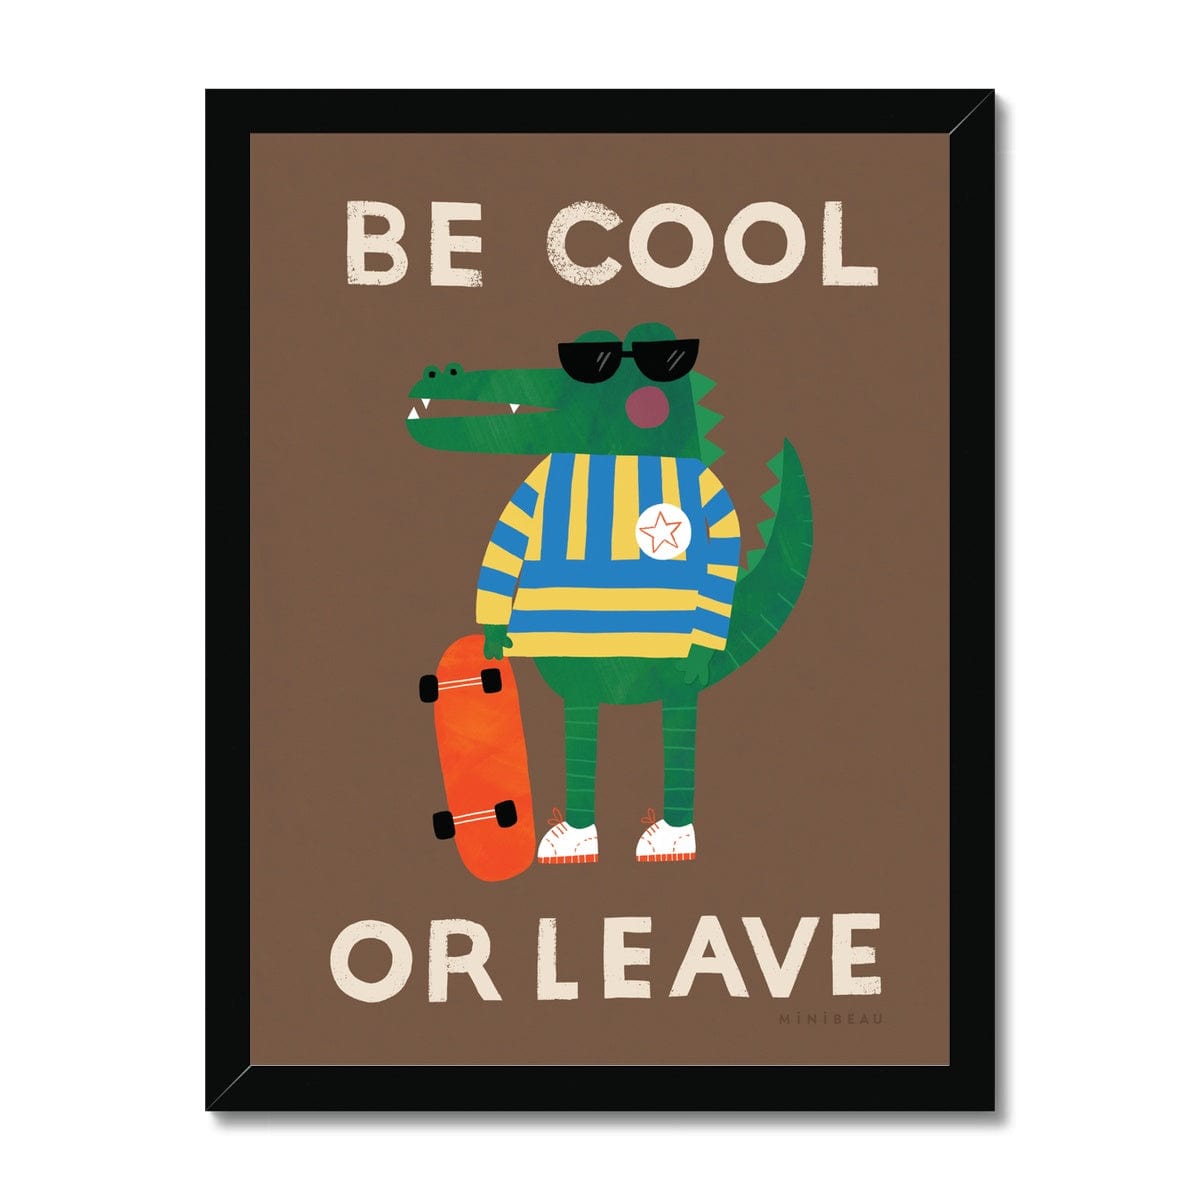 Art print in a black frame. Our be cool or leave art print show a crocodile in a yellow and blue striped jumper and sunglasses, standing on his hind legs holding a skateboard, with the words be cool or leave in an off-white on a brown background.